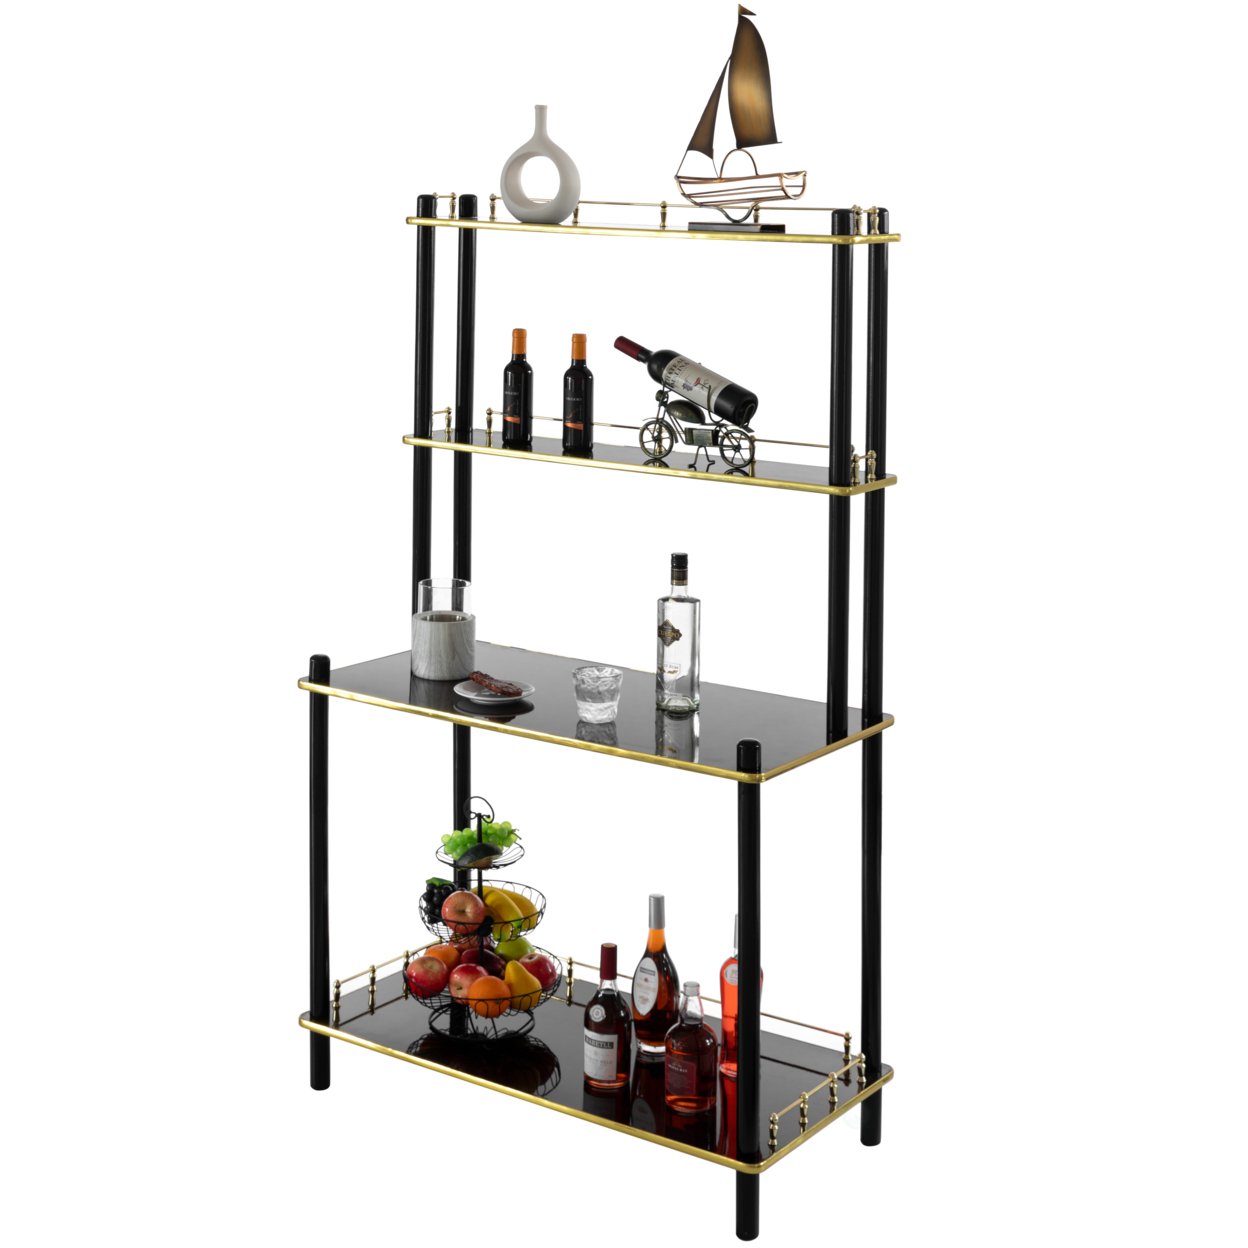 Modern Display Wooden Console Bar Serving Table With 4 Tiered Open Shelves, For Bartender, Kitchen Or Wine Caller Room - Brown